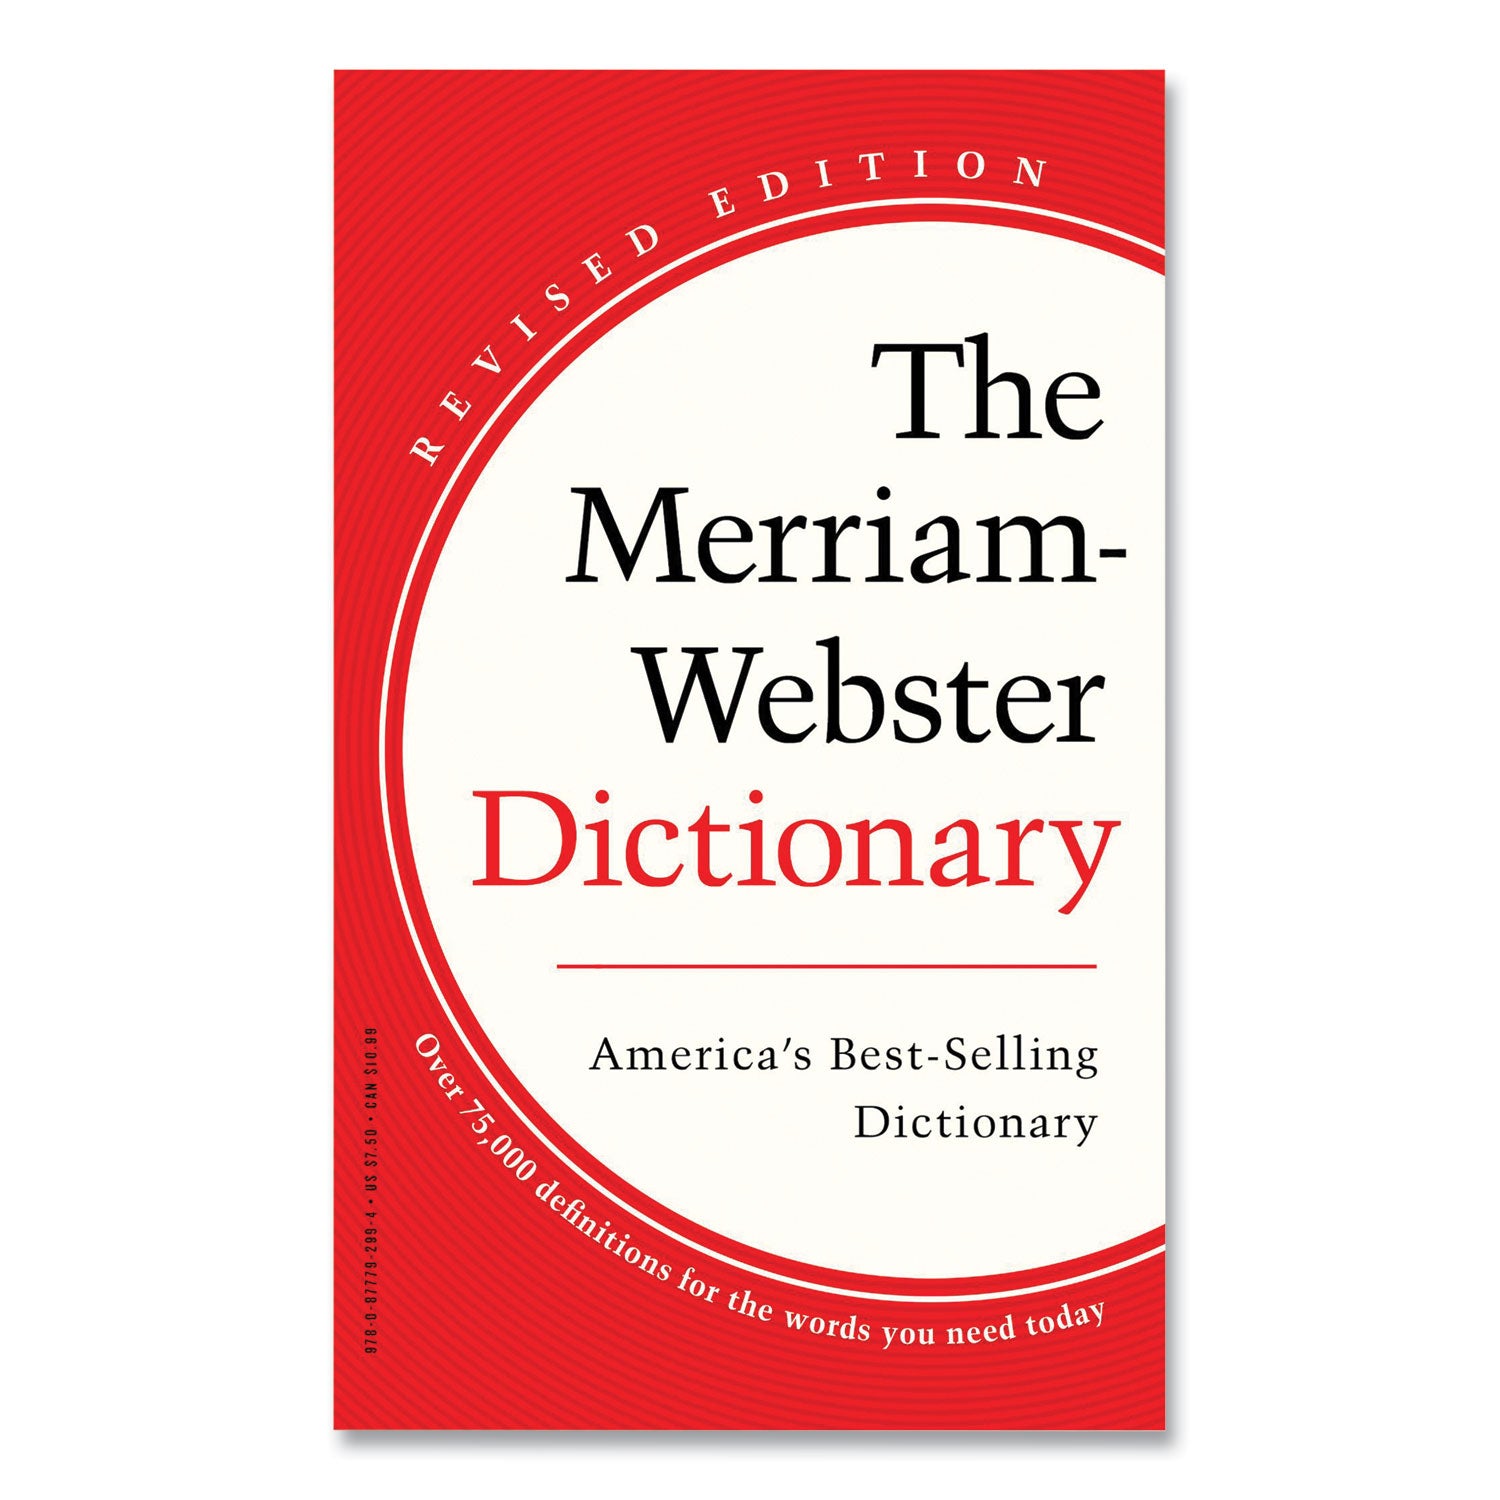 the-merriam-webster-dictionary-revised-edition-paperback-960-pages_mer2952 - 1